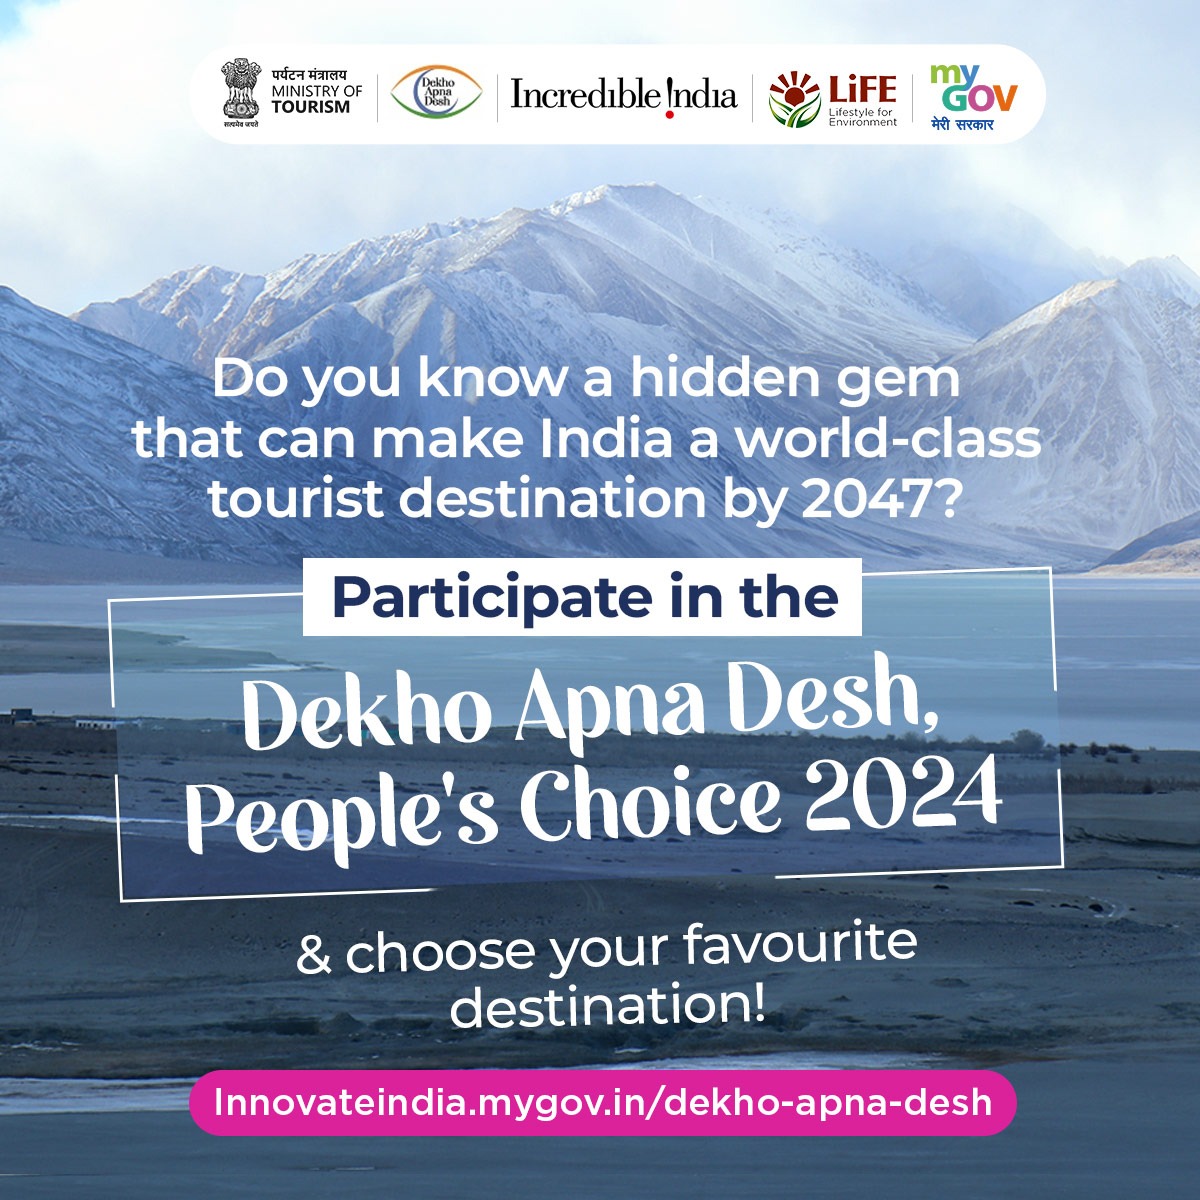 Choose your favorite tourist attractions across various categories as part of Dekho Apna Desh, People’s Choice 2024 on #MyGov. Help the Ministry of Tourism, Government of India, identify attractions for development, contributing to India’s journey towards Viksit Bharat@2047.